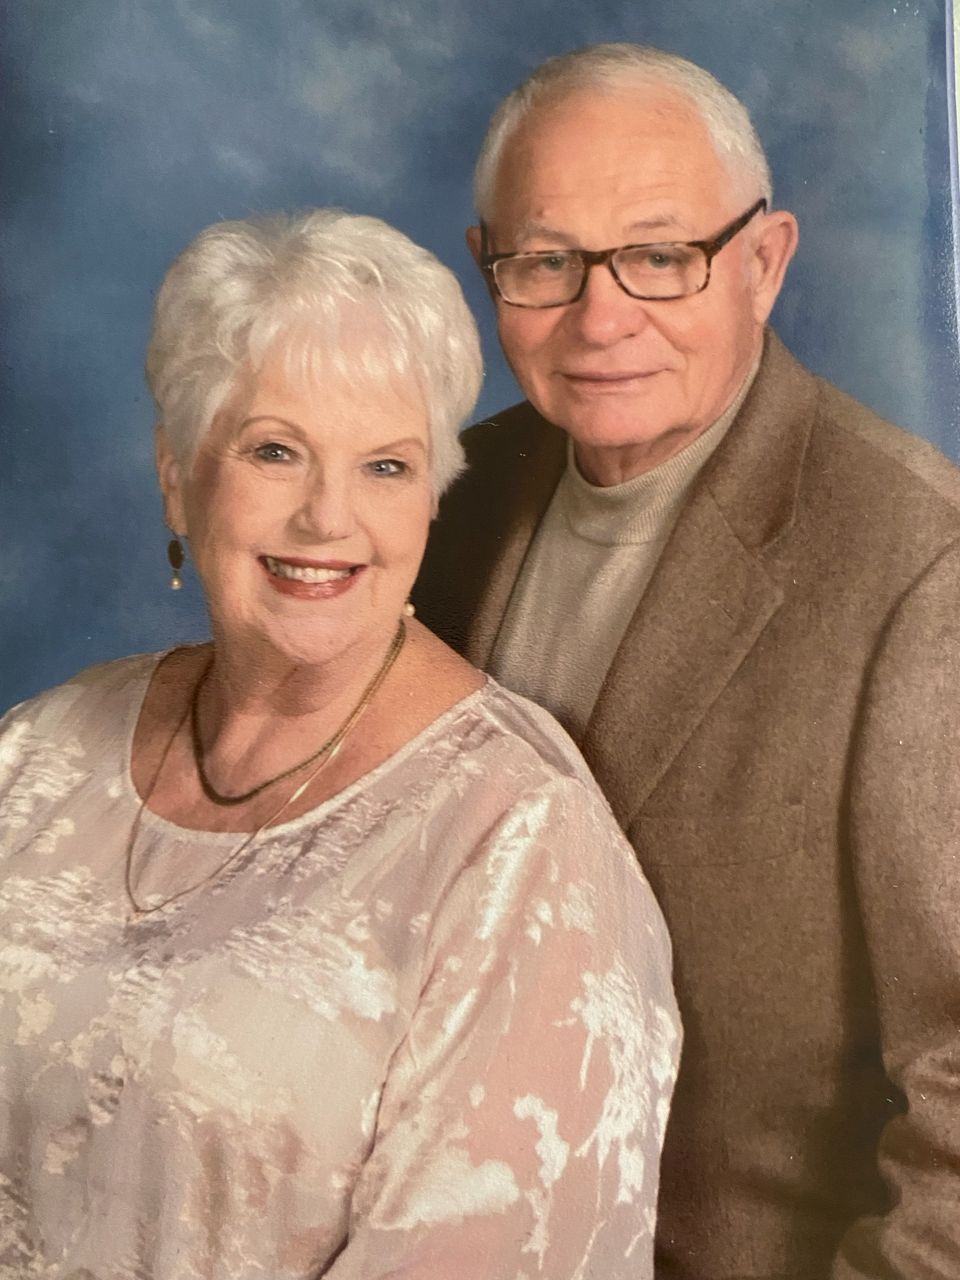  A beloved Janesville couple are two of the victims of a freak lightening storm near the White House.  